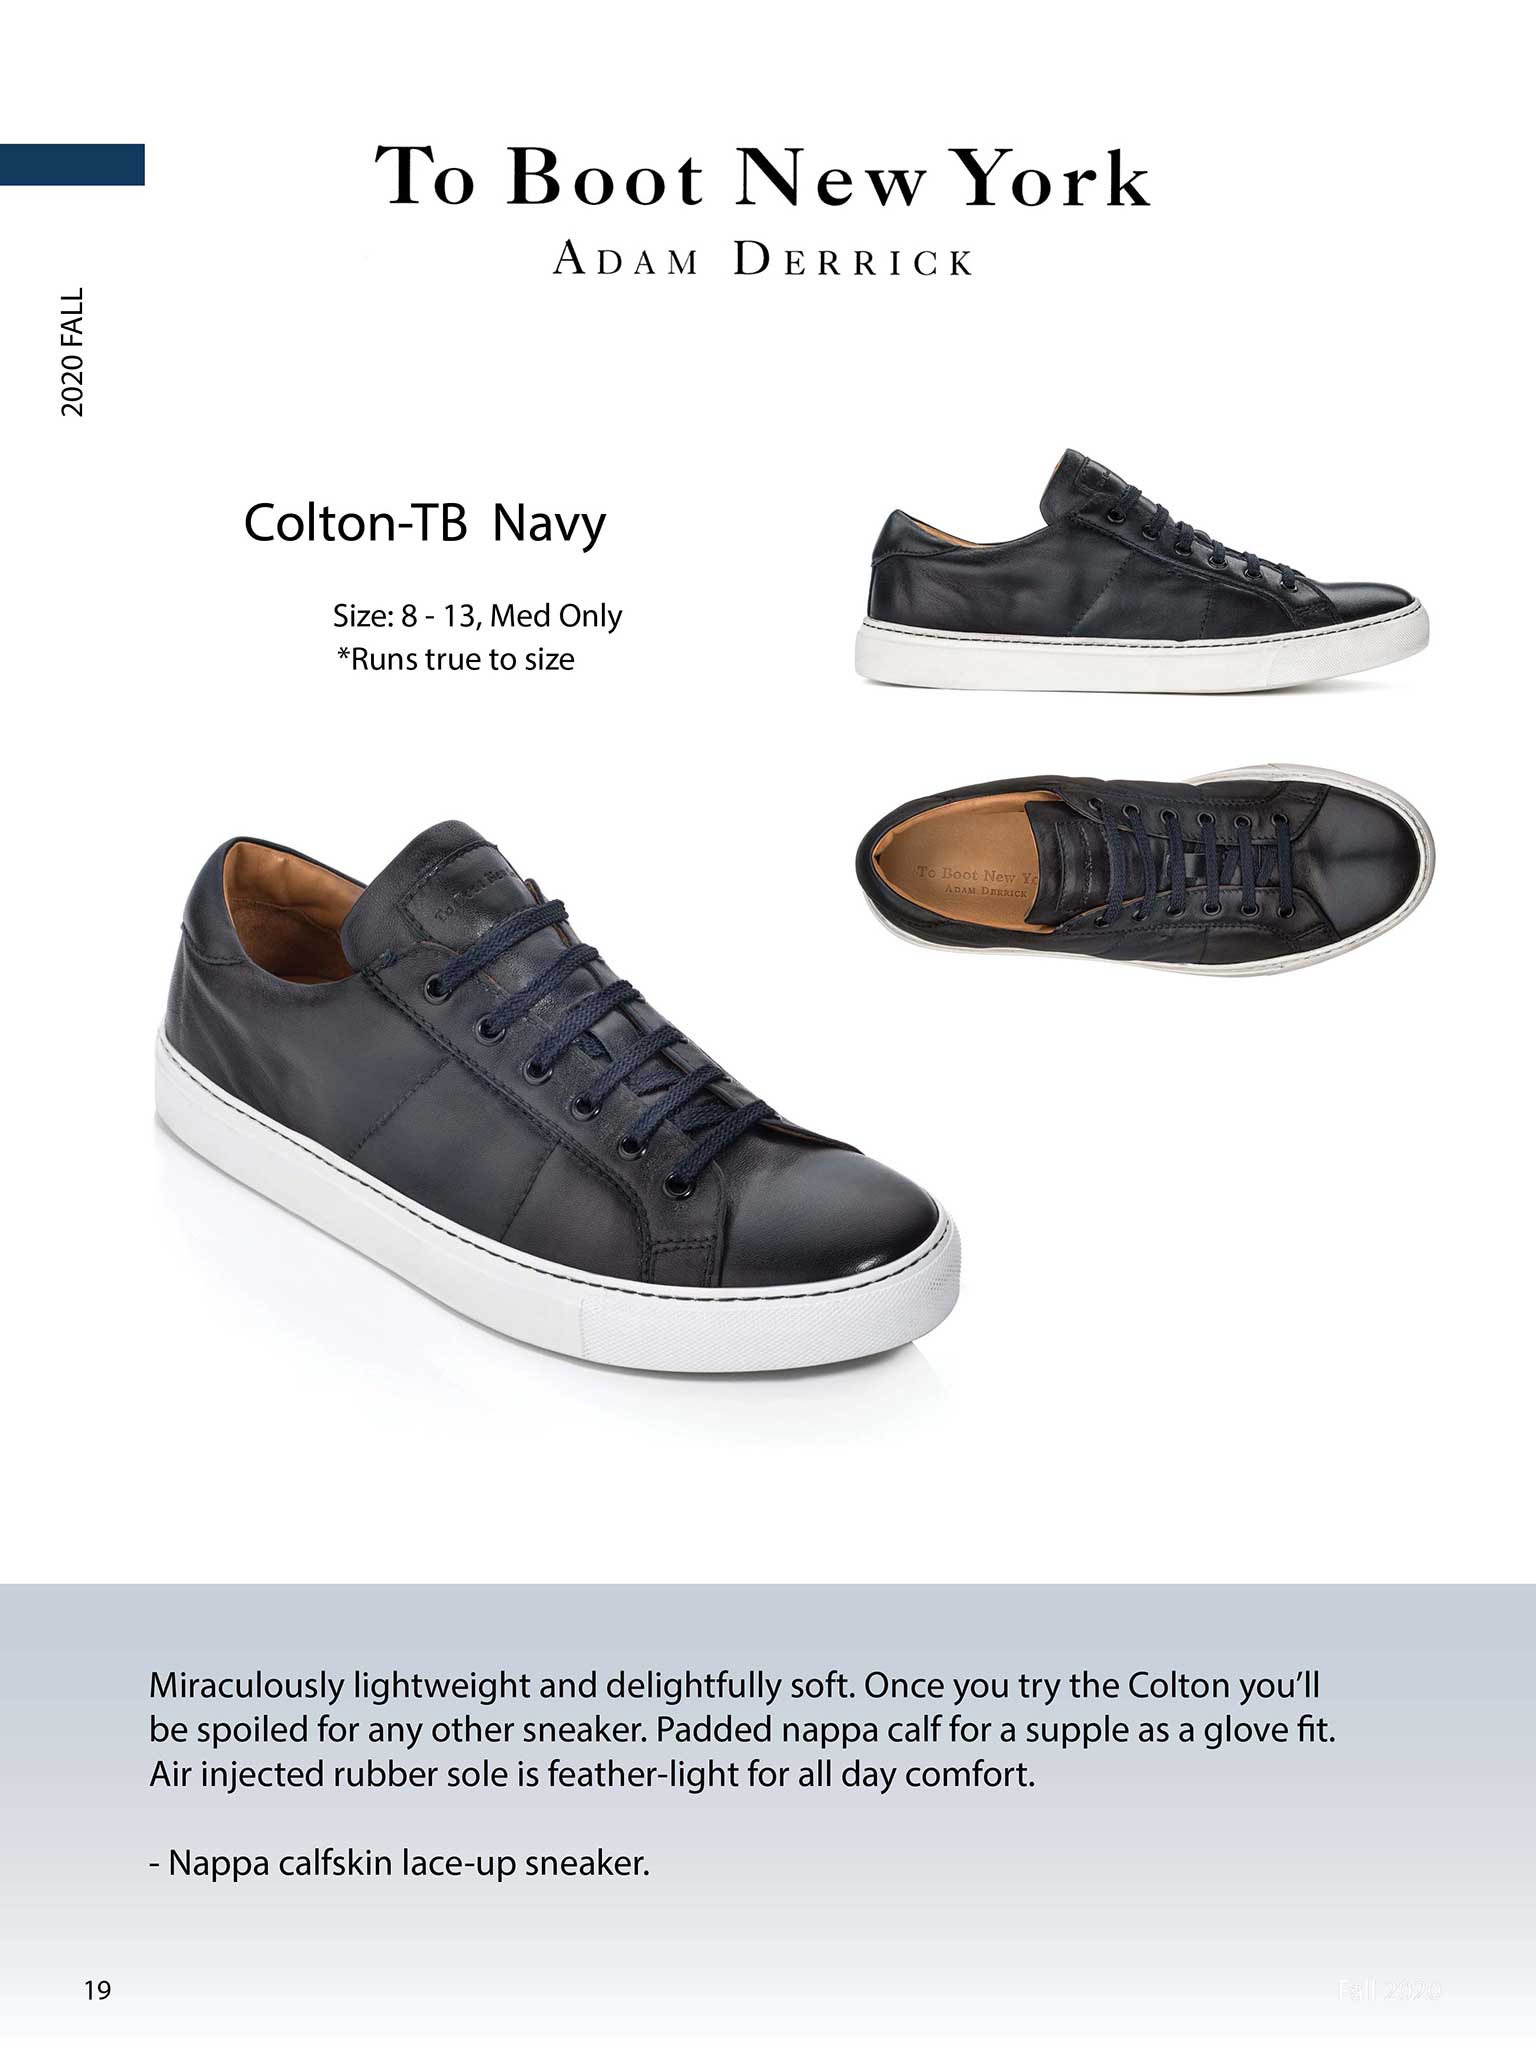 To Boot New York                                                                                                                                                                                                                                          , Colton by Navy by To Boot New York